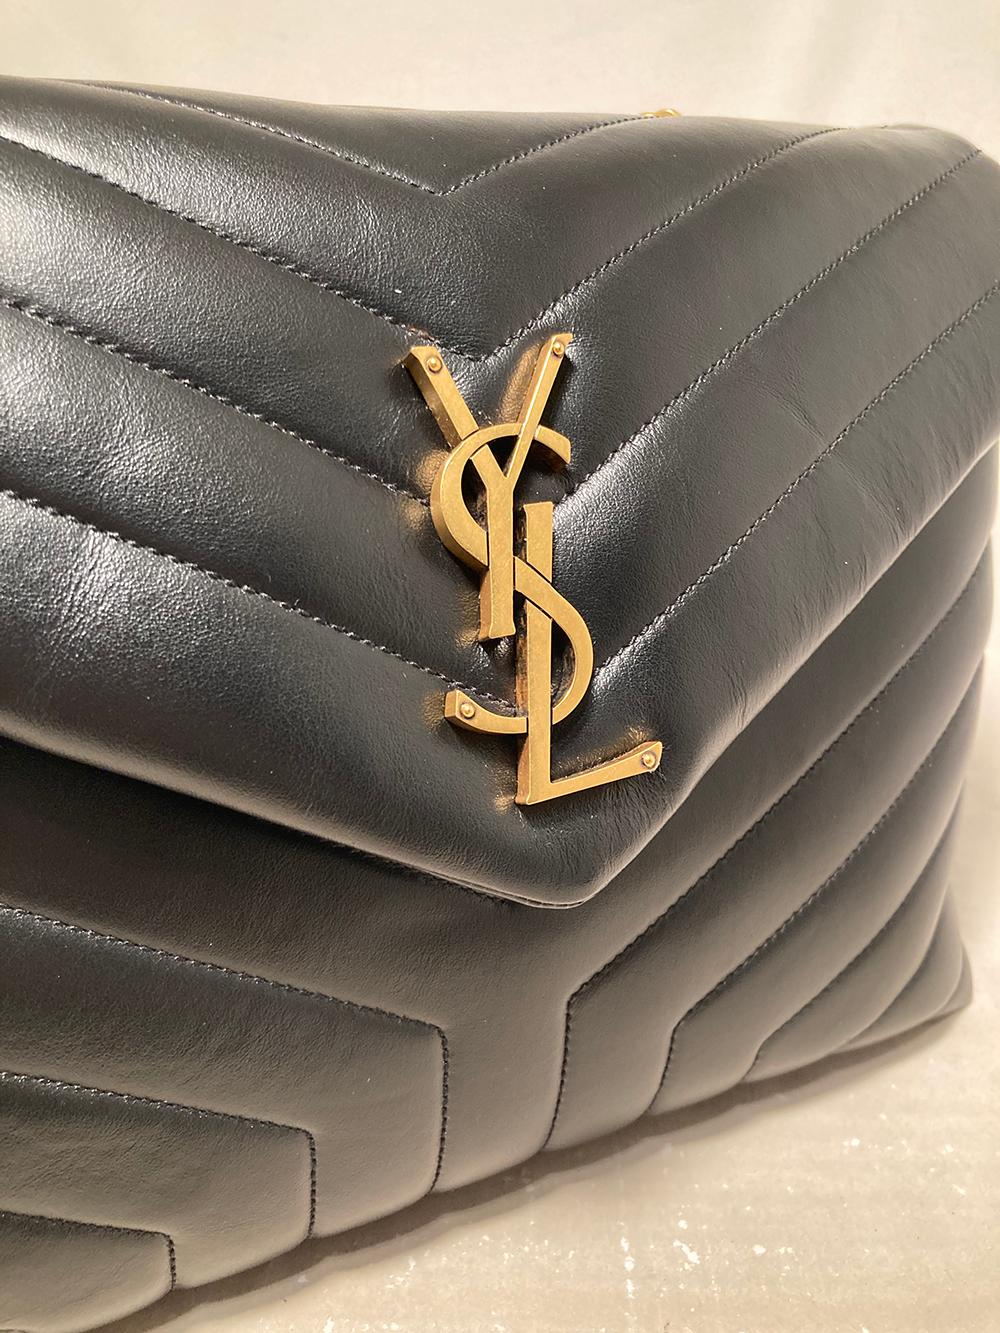 ysl quilted tote